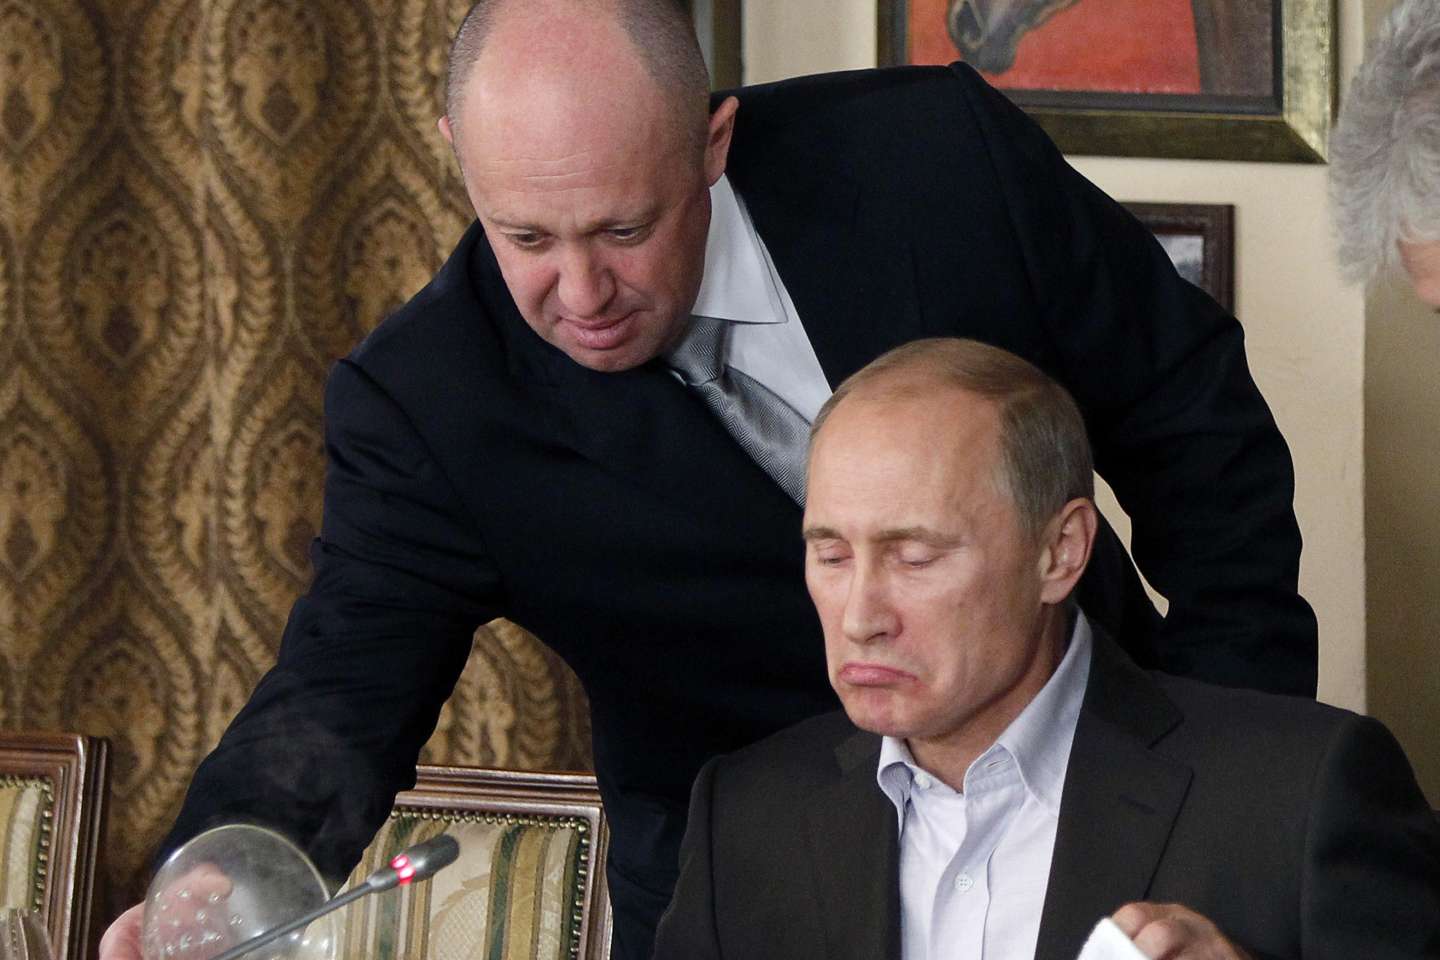 FILE Yevgeny Prigozhin, top, serves food to then-Russian Prime Minister Vladimir Putin at Prigozhin's restaurant outside Moscow, Russia on Nov. 11, 2011. Prigozhin, the owner of the Wagner private military contractor who called for an armed rebellion aimed at ousting Russia's defense minister has confirmed in a video that he and his troops have reached Rostov-on-Don. (AP Photo, File)